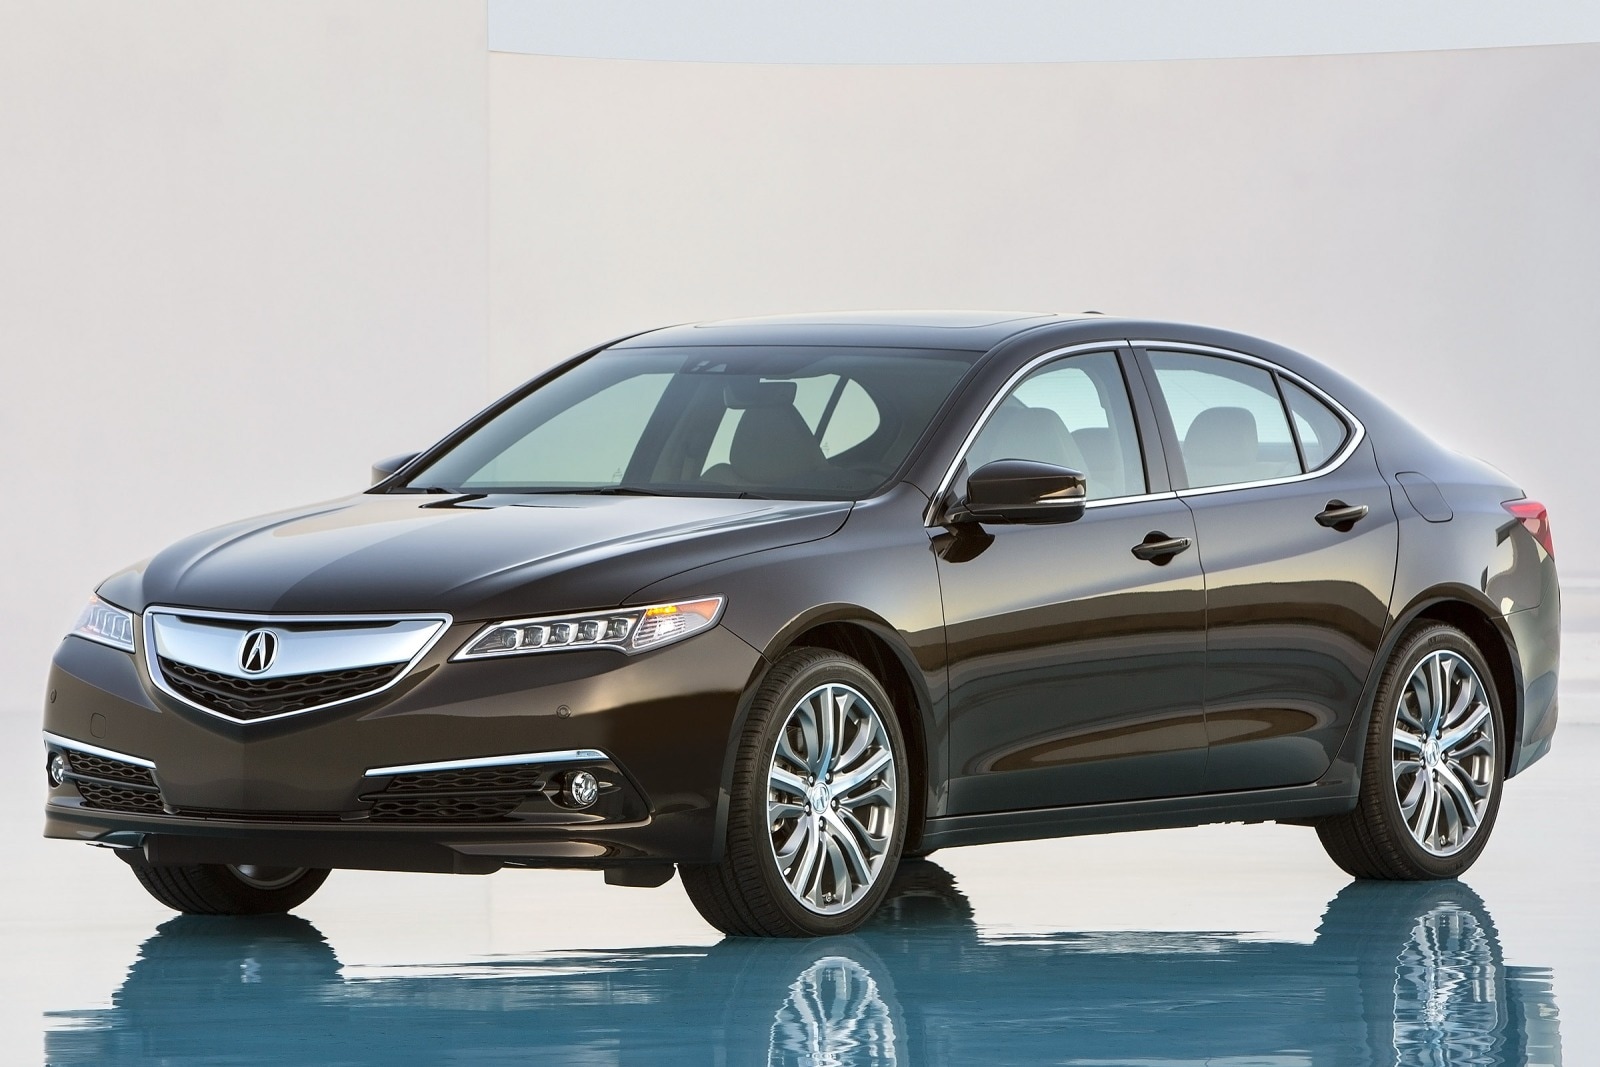 2015 Acura TLX Review & Ratings | Edmunds